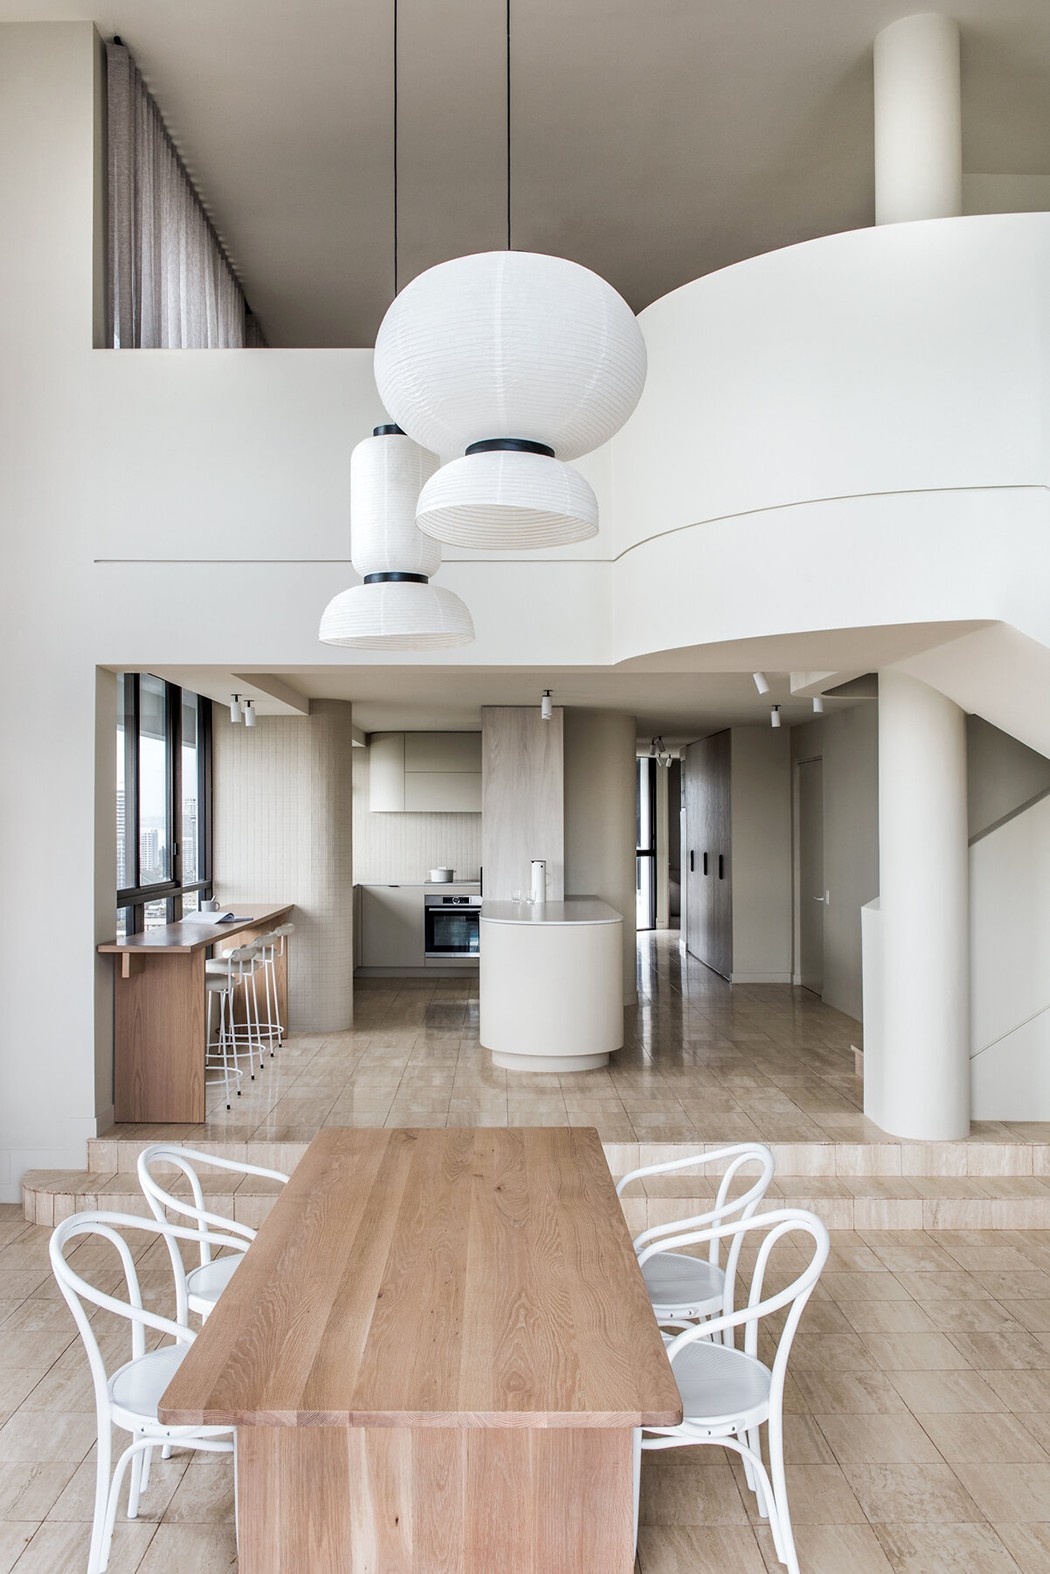 Décor | In Design: A Penthouse by Melbourne-Based CJH Studio